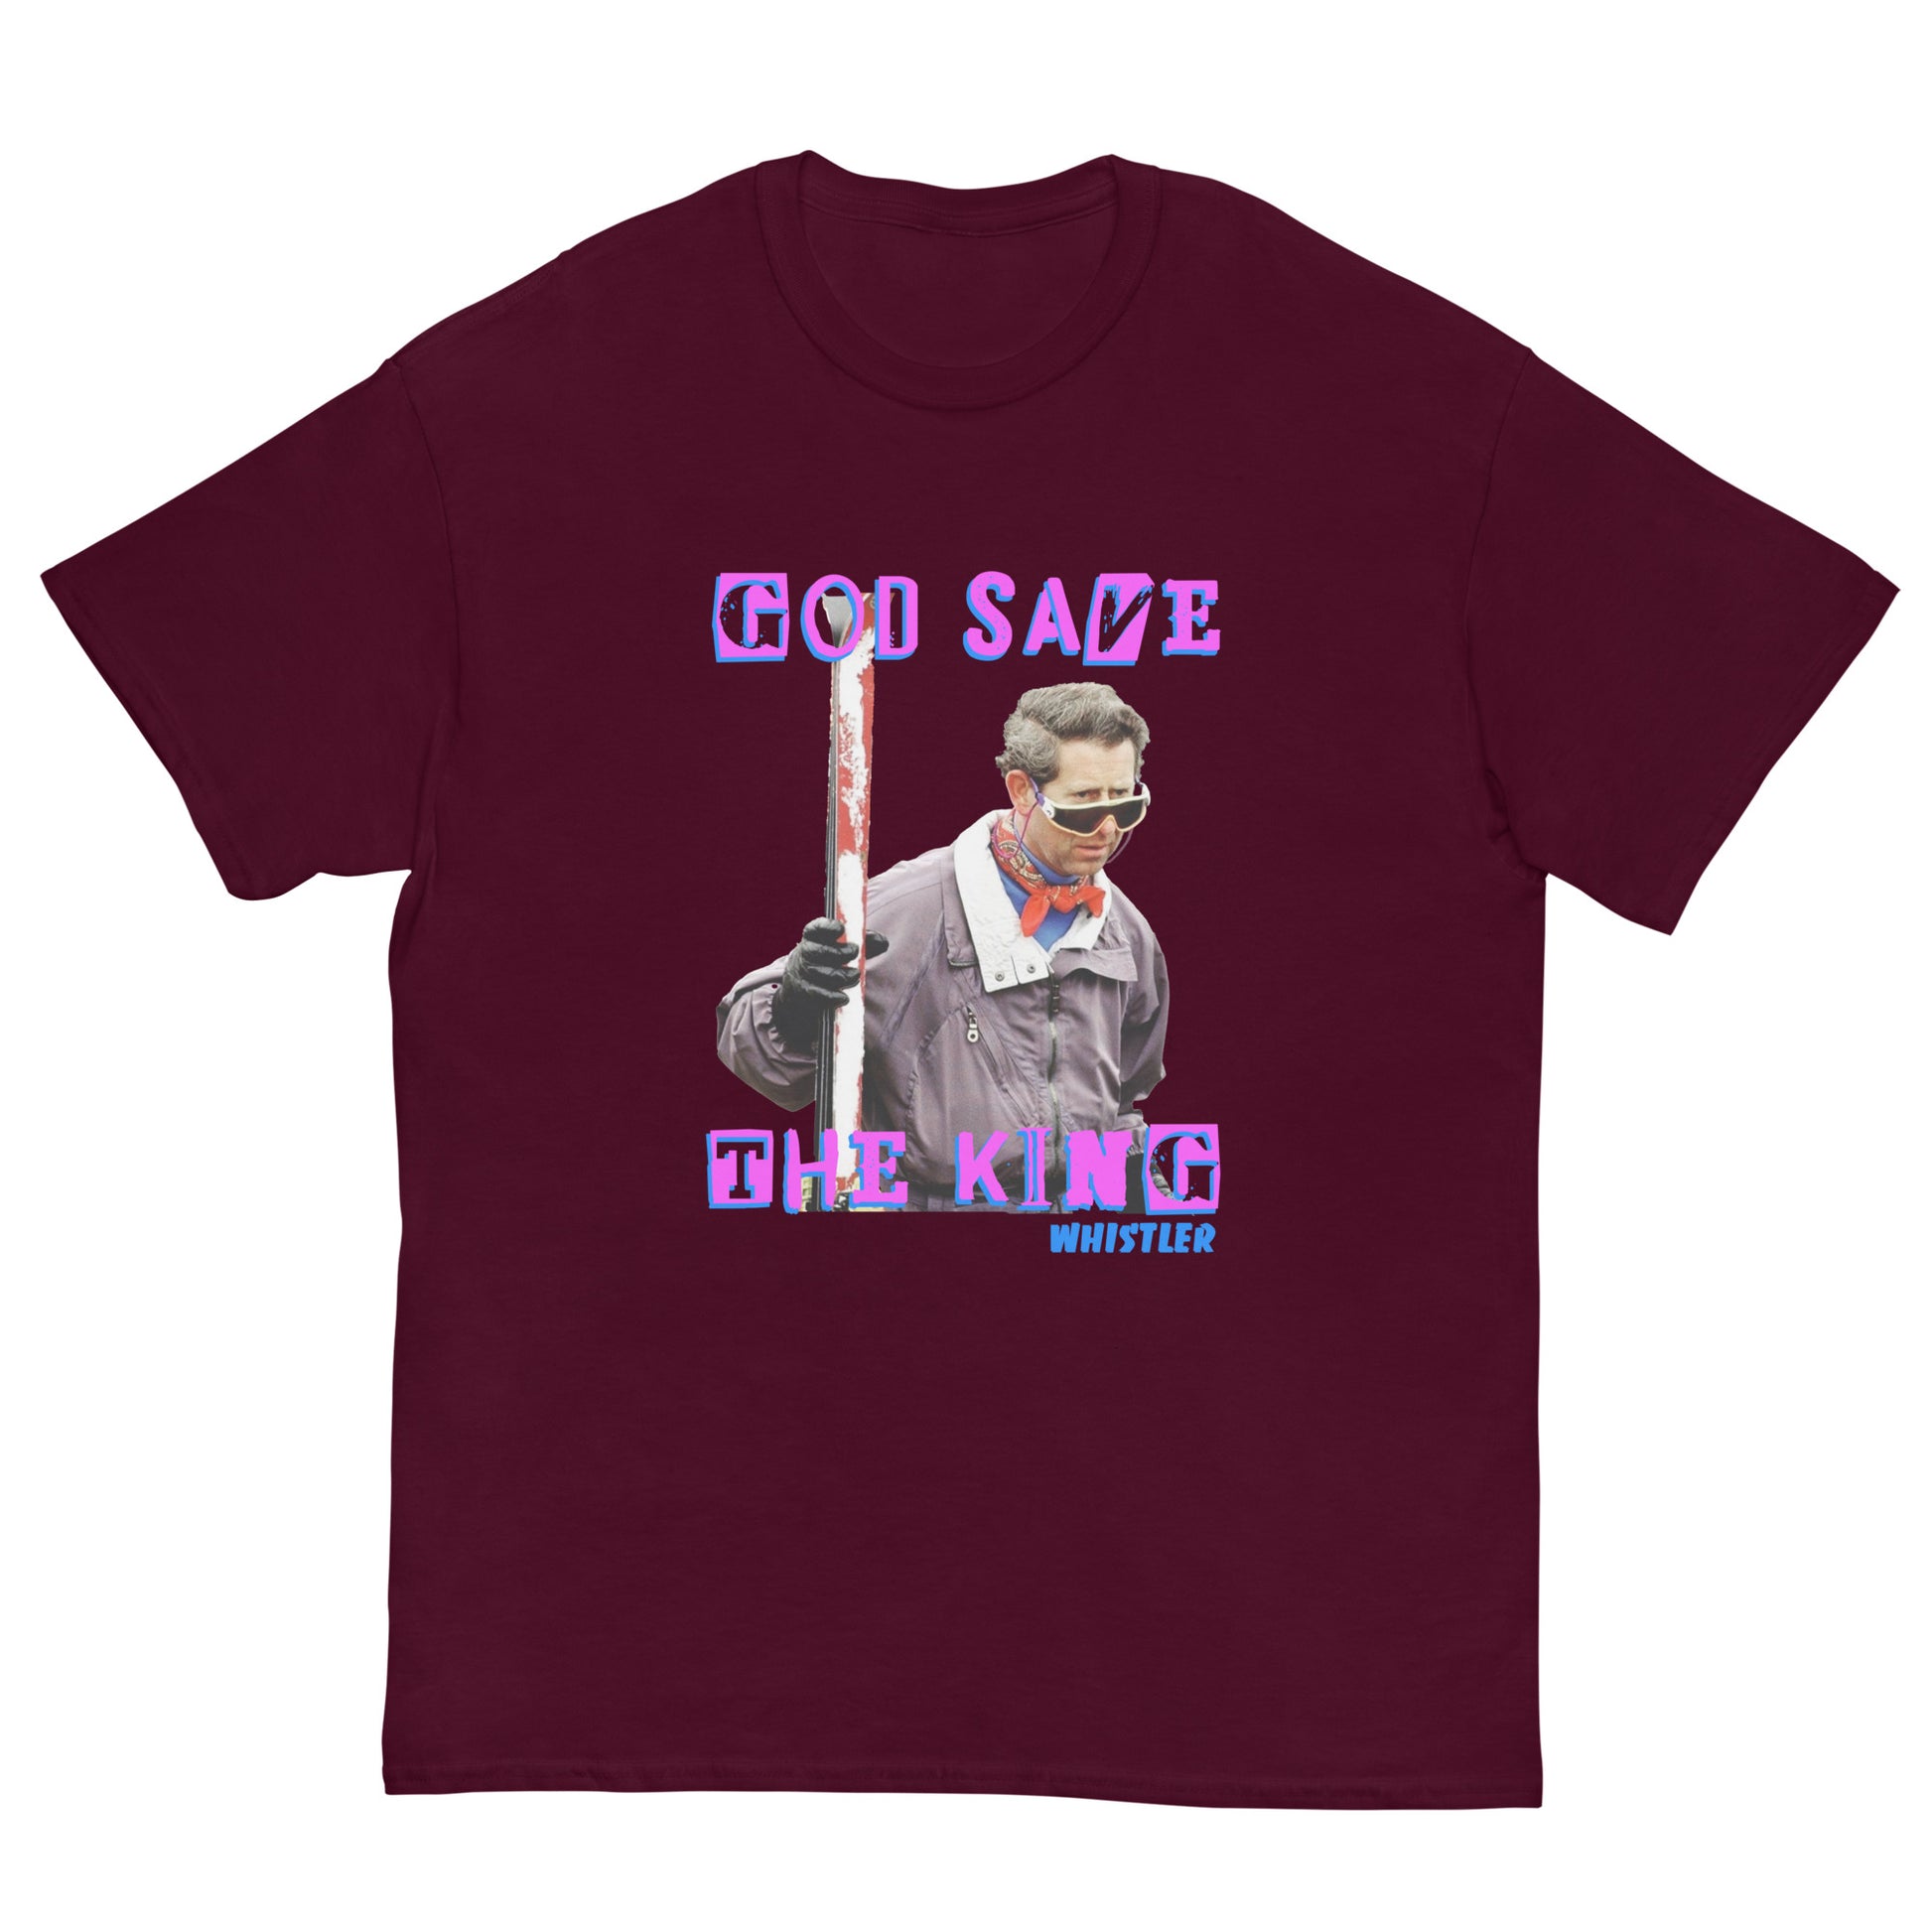 printed t-shirt god save the king whistler red